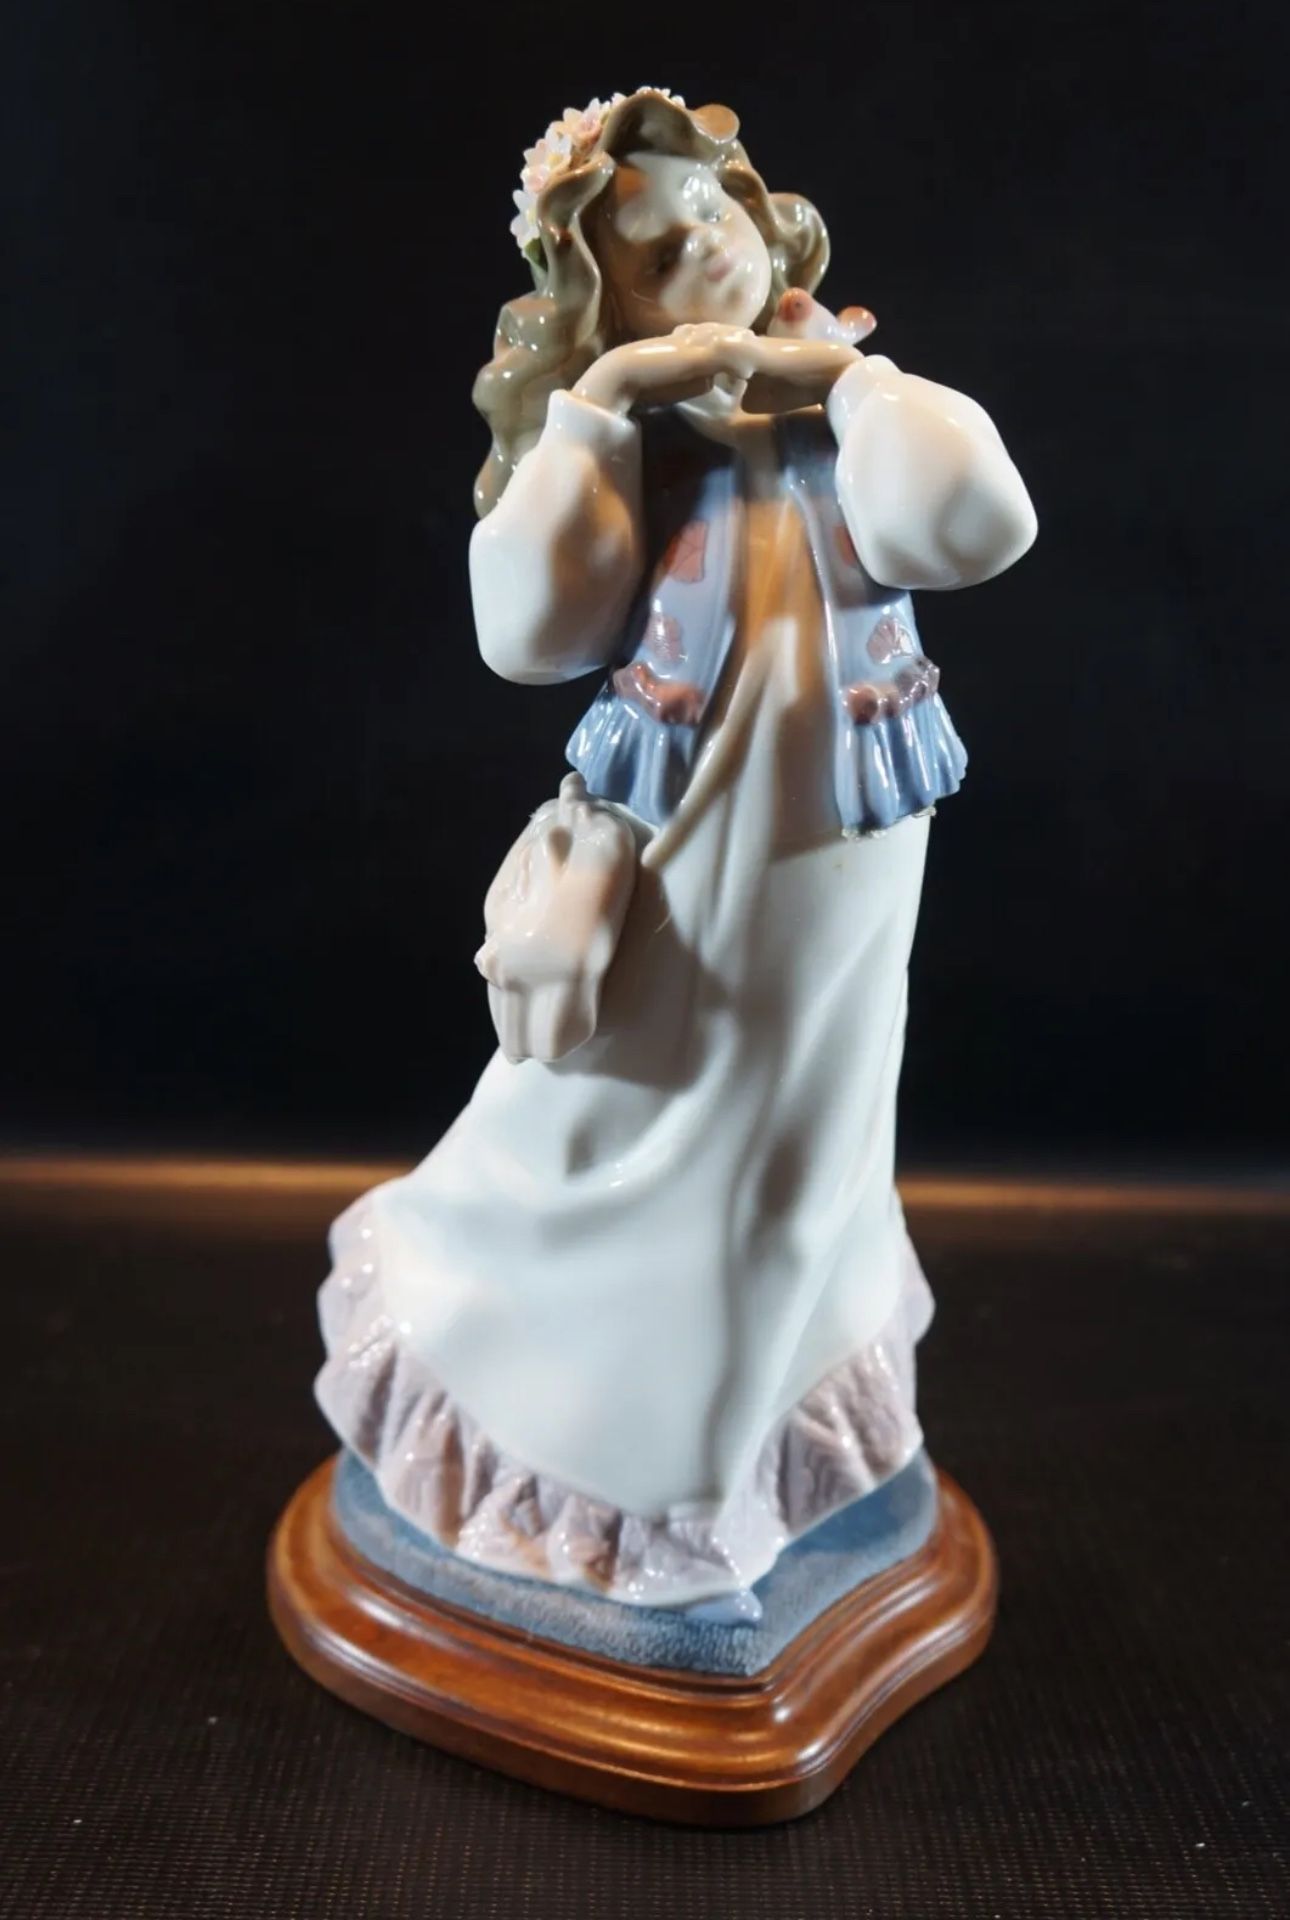 NEW IN BOX Lladro 6401 Dreams of a Summer Past Porcelain Figurine